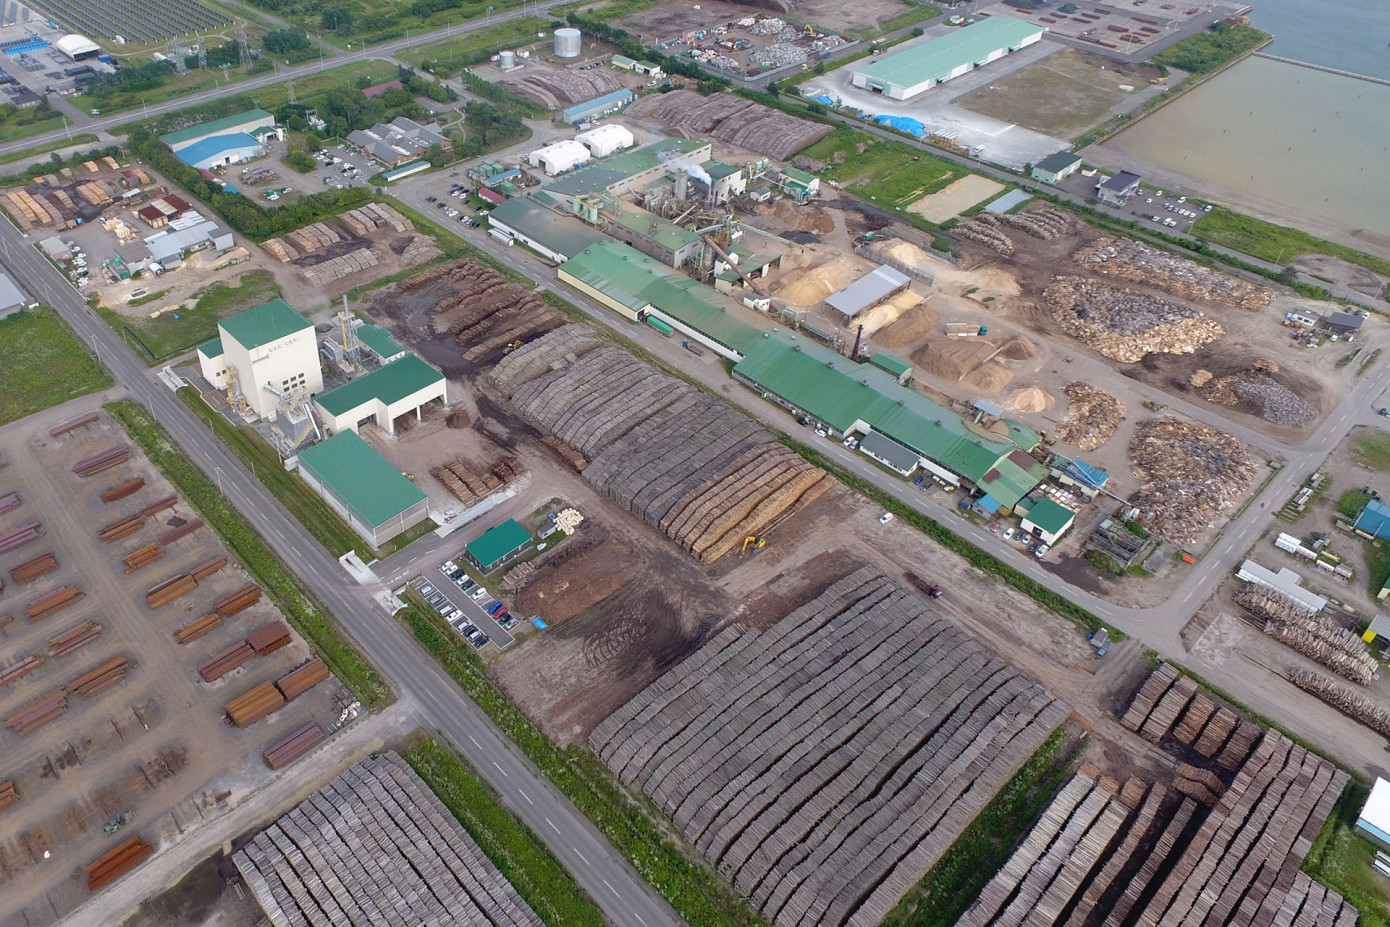 Enviva Holdings’s off-take contract with Sumitomo Forestry becomes firm